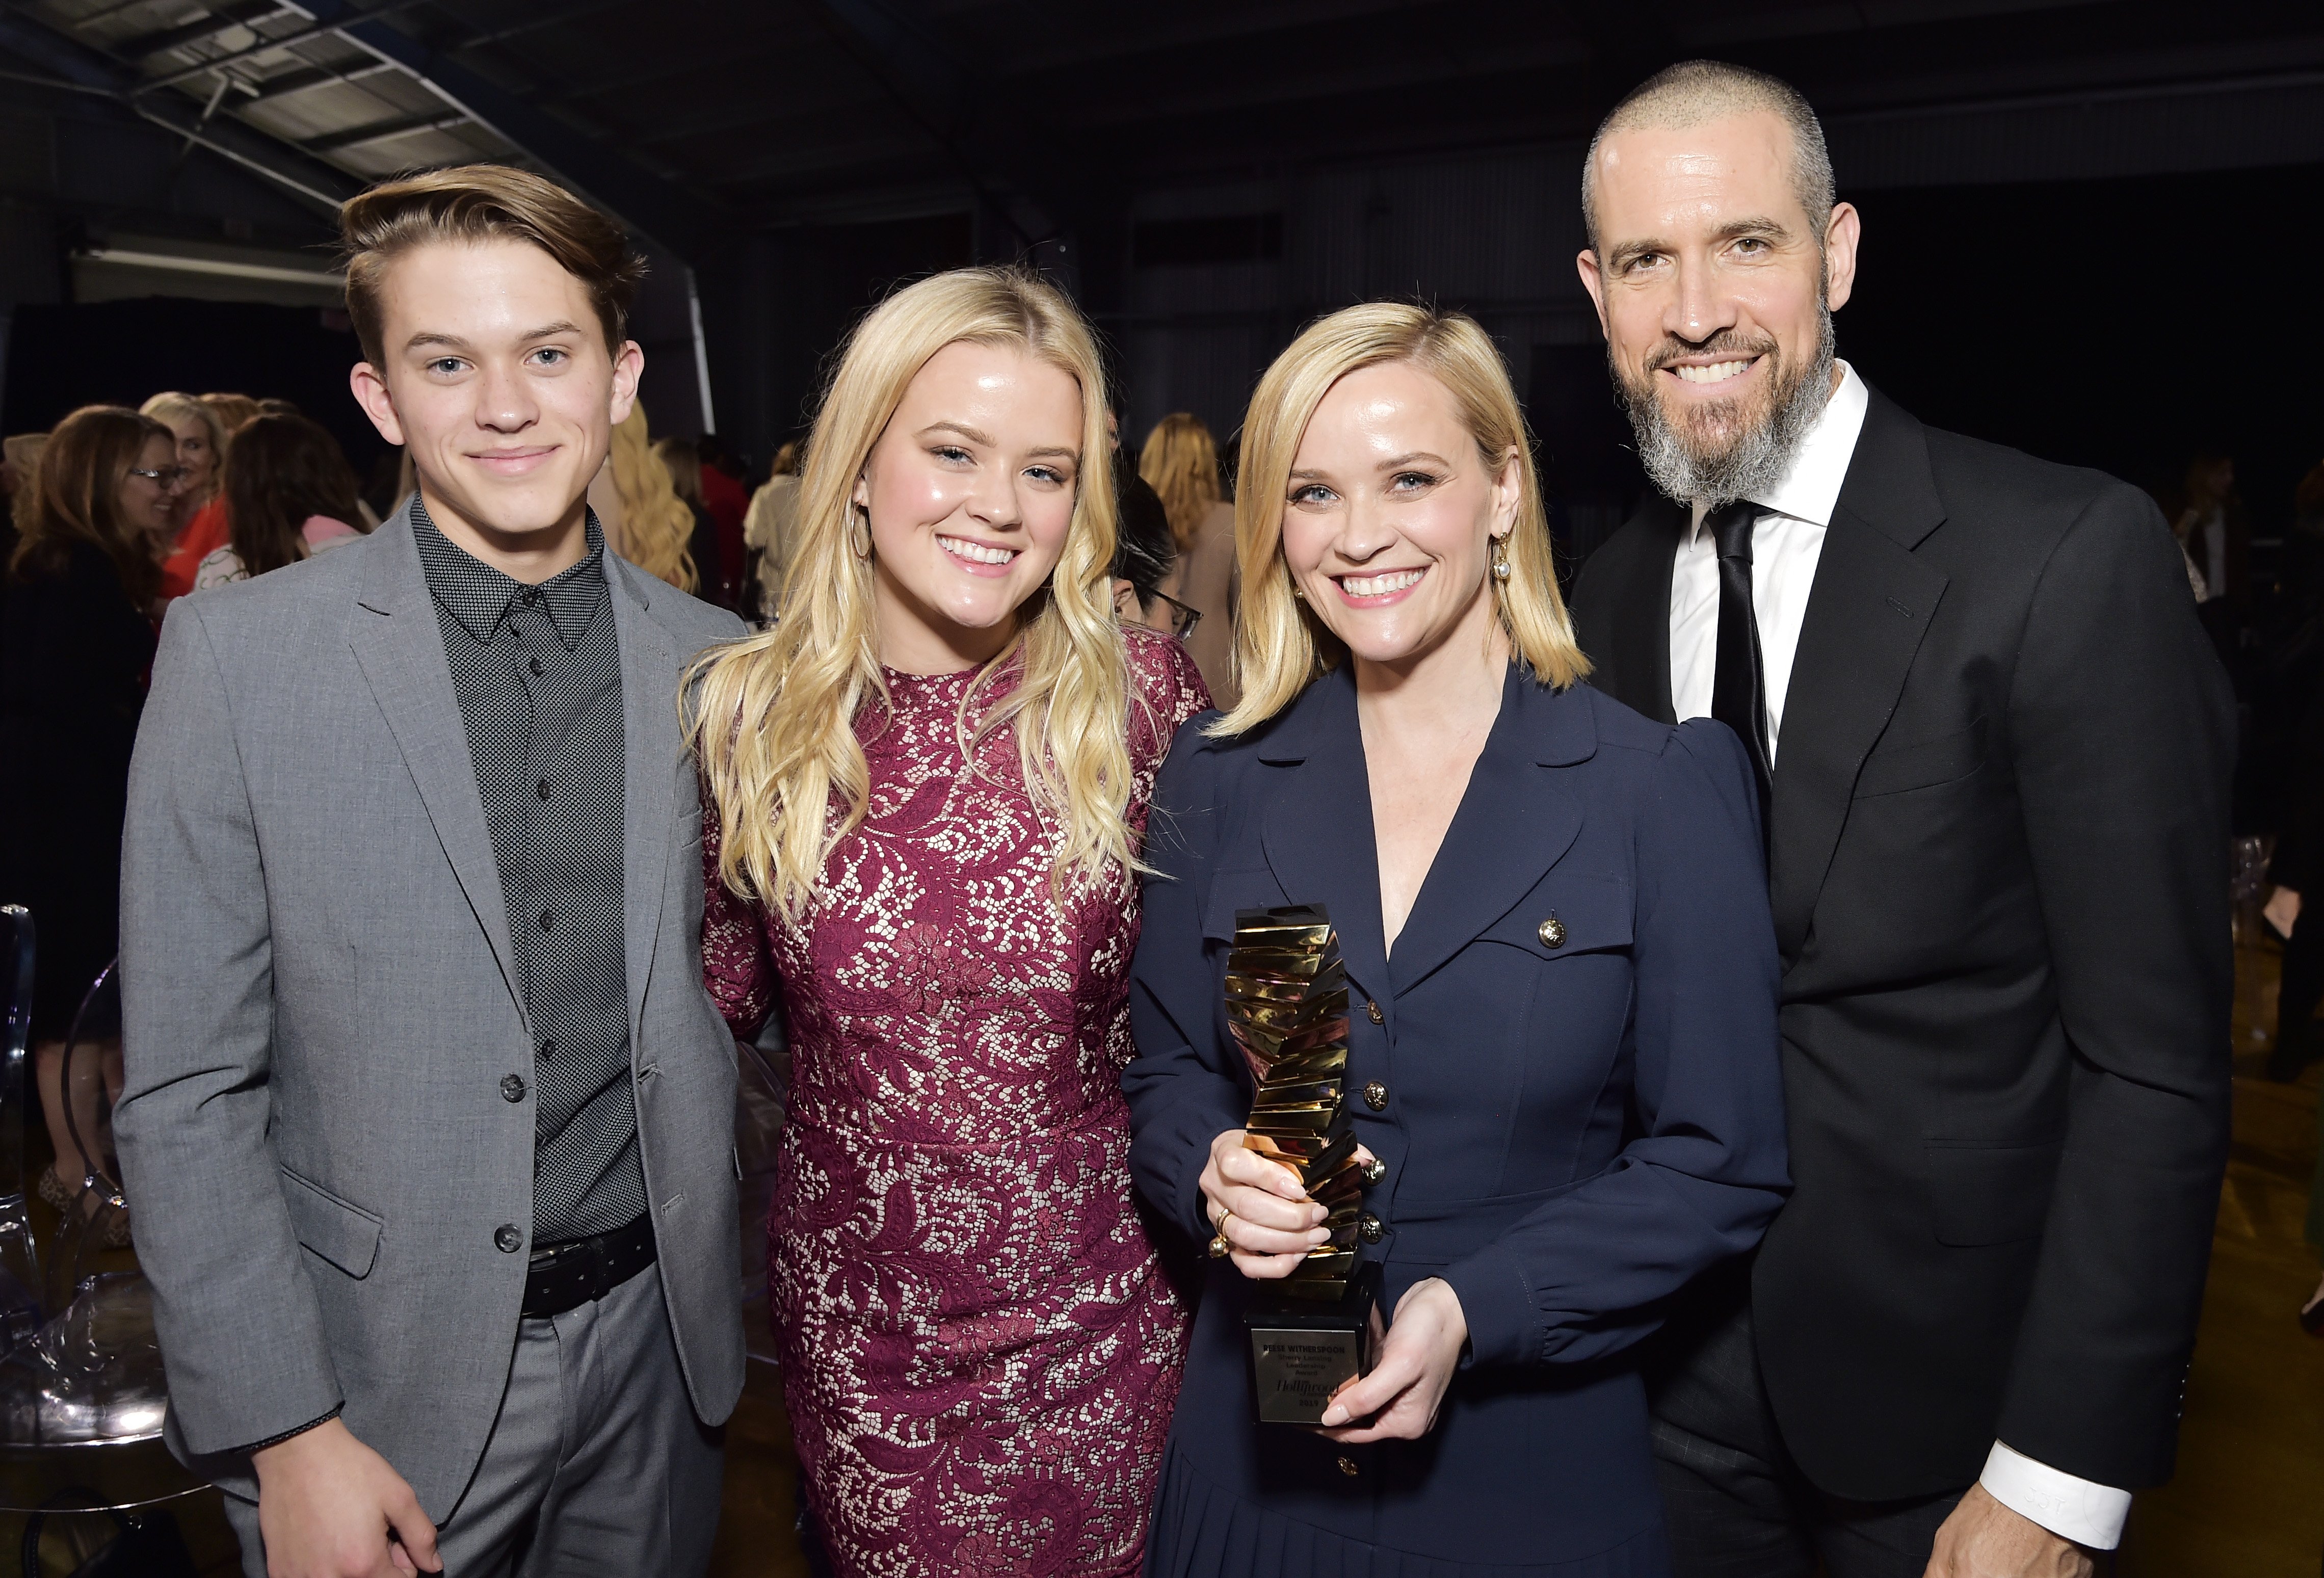 Deacon Reese Phillippe, Ava Elizabeth Phillippe, Reese Witherspoon, and Jim Toth at The Hollywood Reporter's Power 100 Women in Entertainment on December 11, 2019, in Hollywood, California. | Source: Getty Images